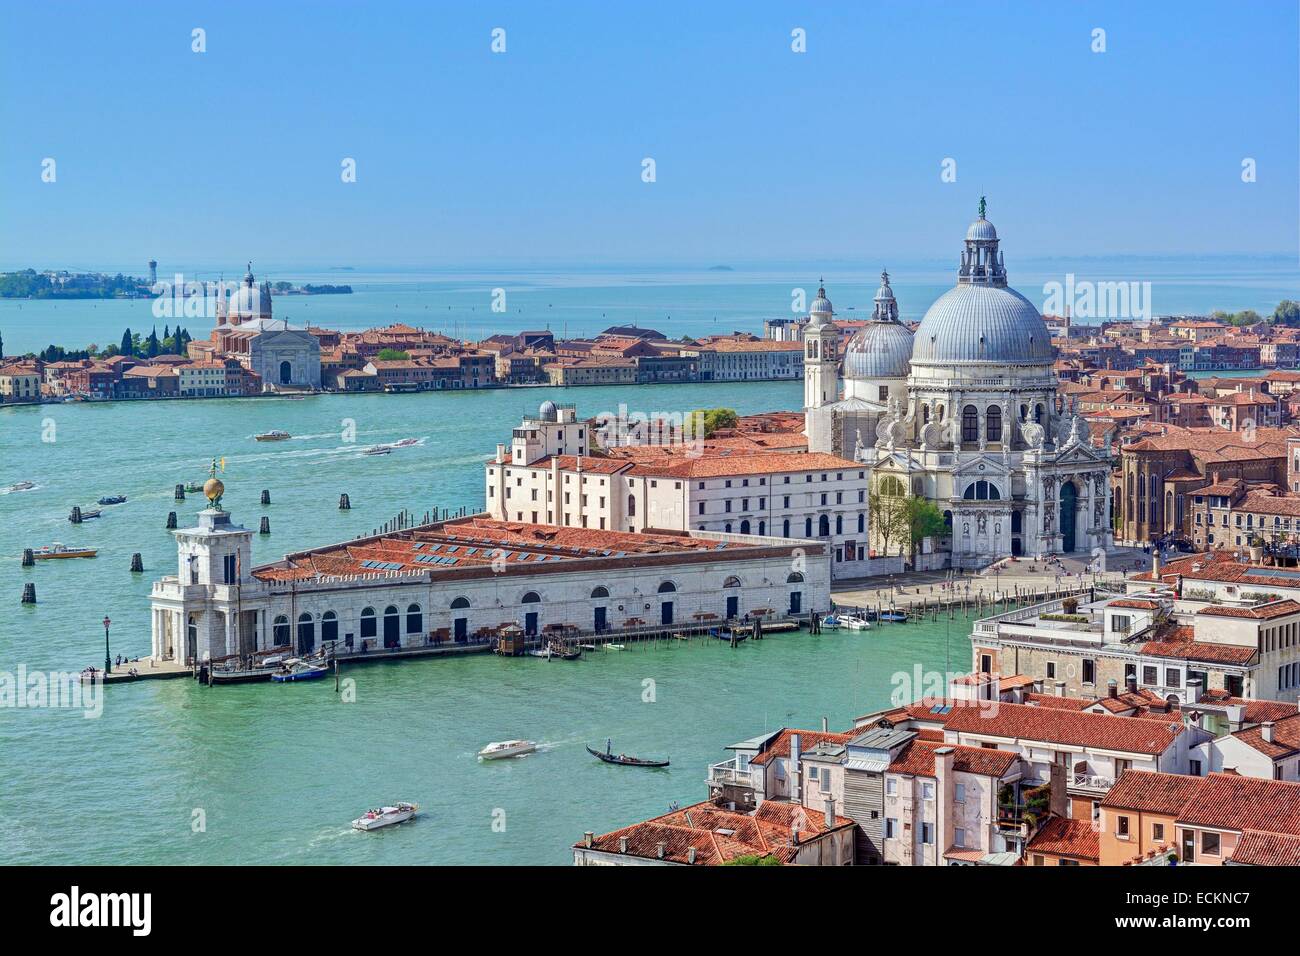 Italy, Veneto, Venice, listed as World Heritage by UNESCO, the Grand Canal in the foreground, the Punta Della Dogana (Customs point) where the Franτois Pinault Foundation is located and Santa Maria Della Salute basilica Stock Photo